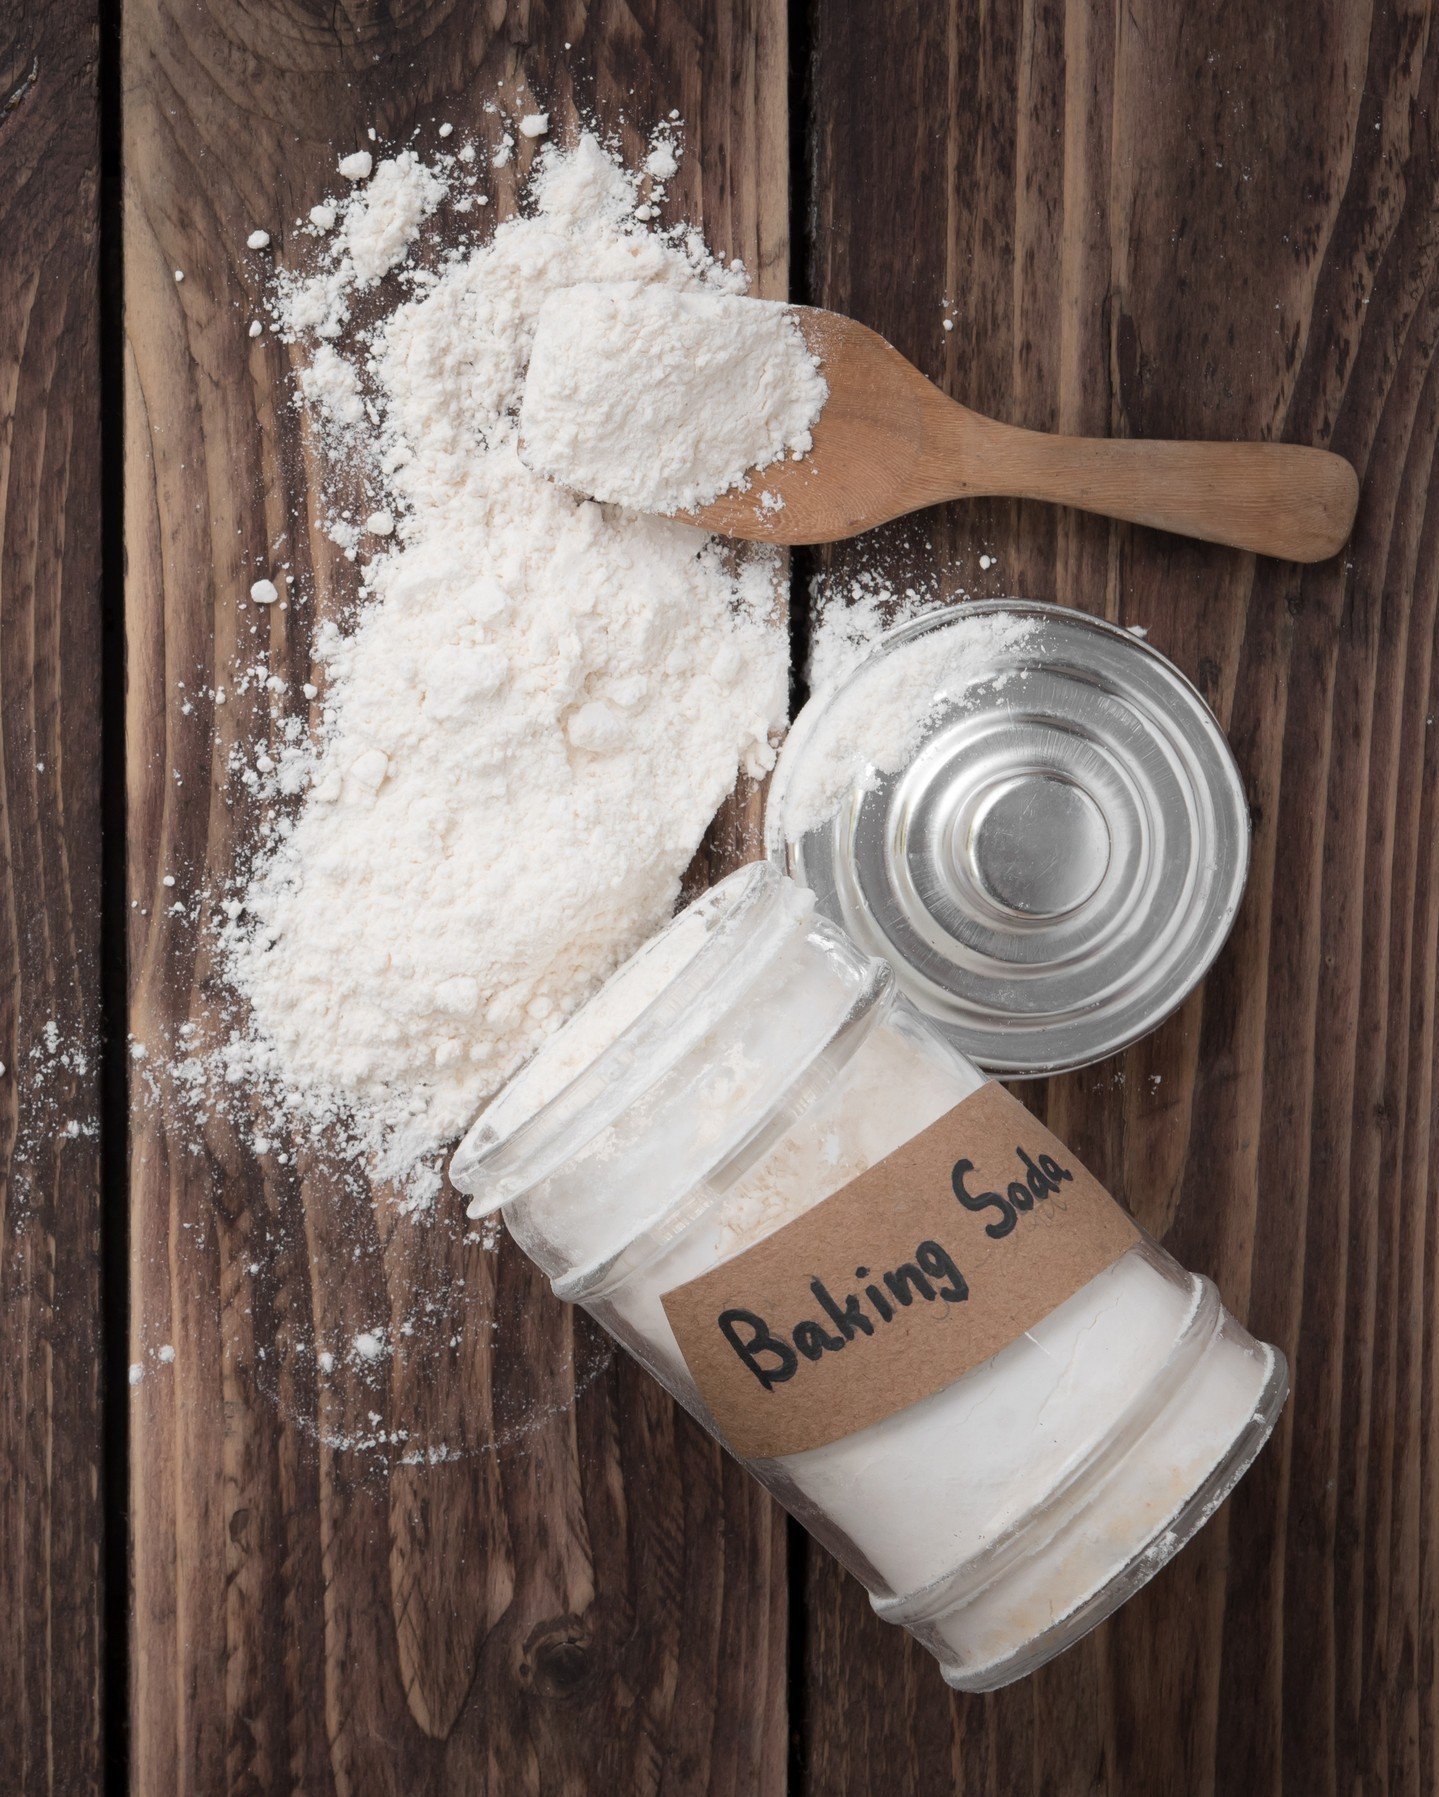 Tired of health fads?  Before you grab that baking soda for EVERYTHING, let's separate the facts from the hype.  Check out our new blog post for the truth about this kitchen staple! 

https://loom.ly/rjqTb08

 #newblog #checkout #bakingsoda #forthetr